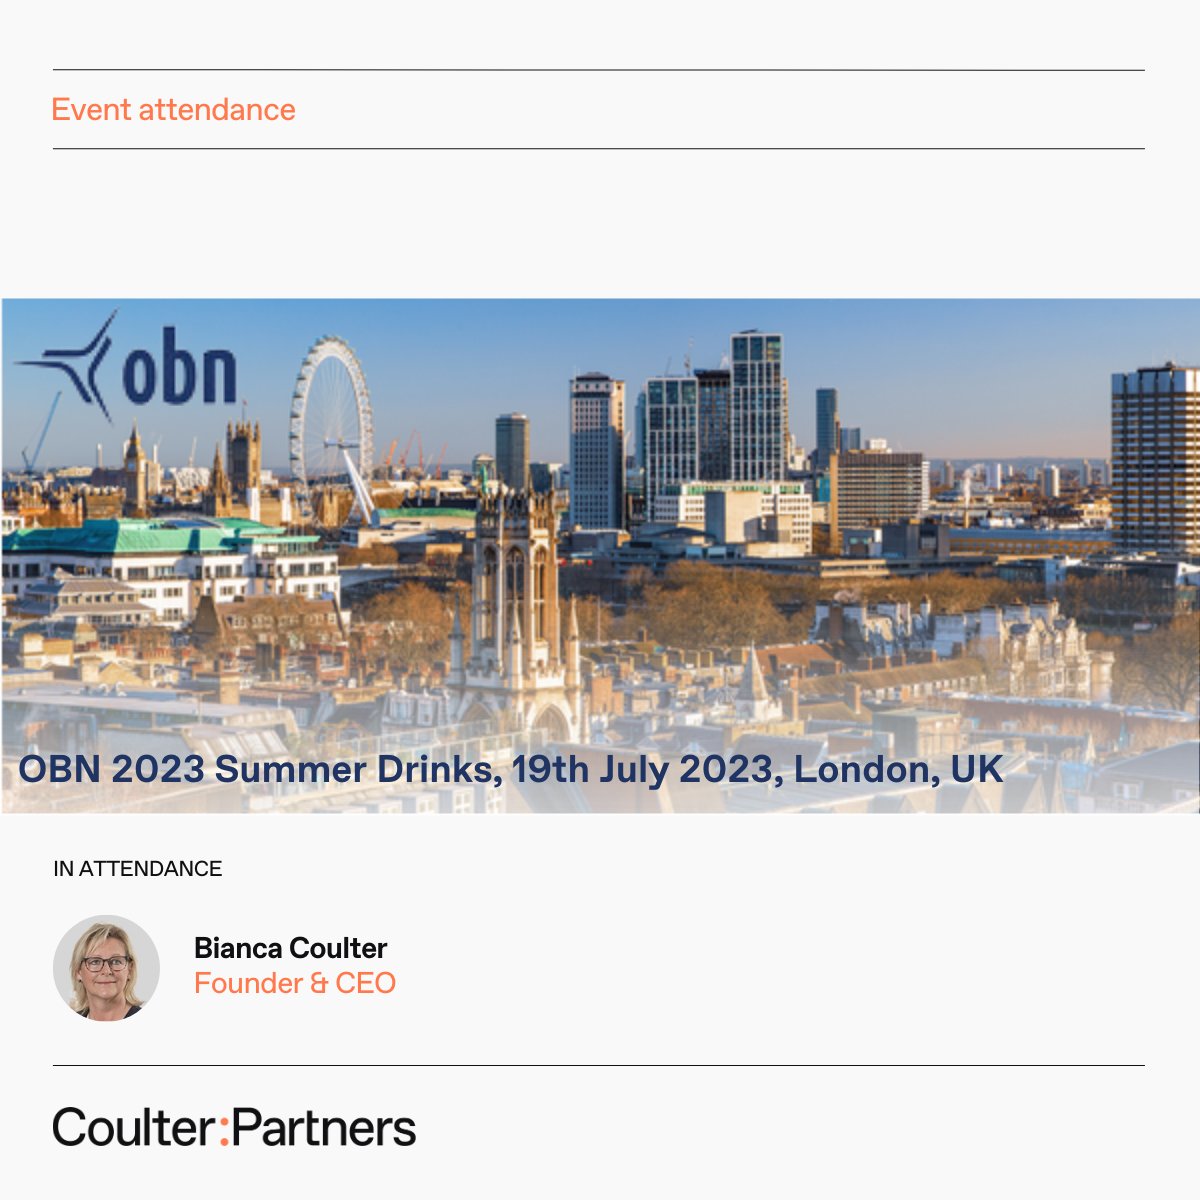 Say hello to Bianca Coulter at the OBN 2023 Summer Drinks this Wednesday 19th July. linkedin.com/posts/coulter-…